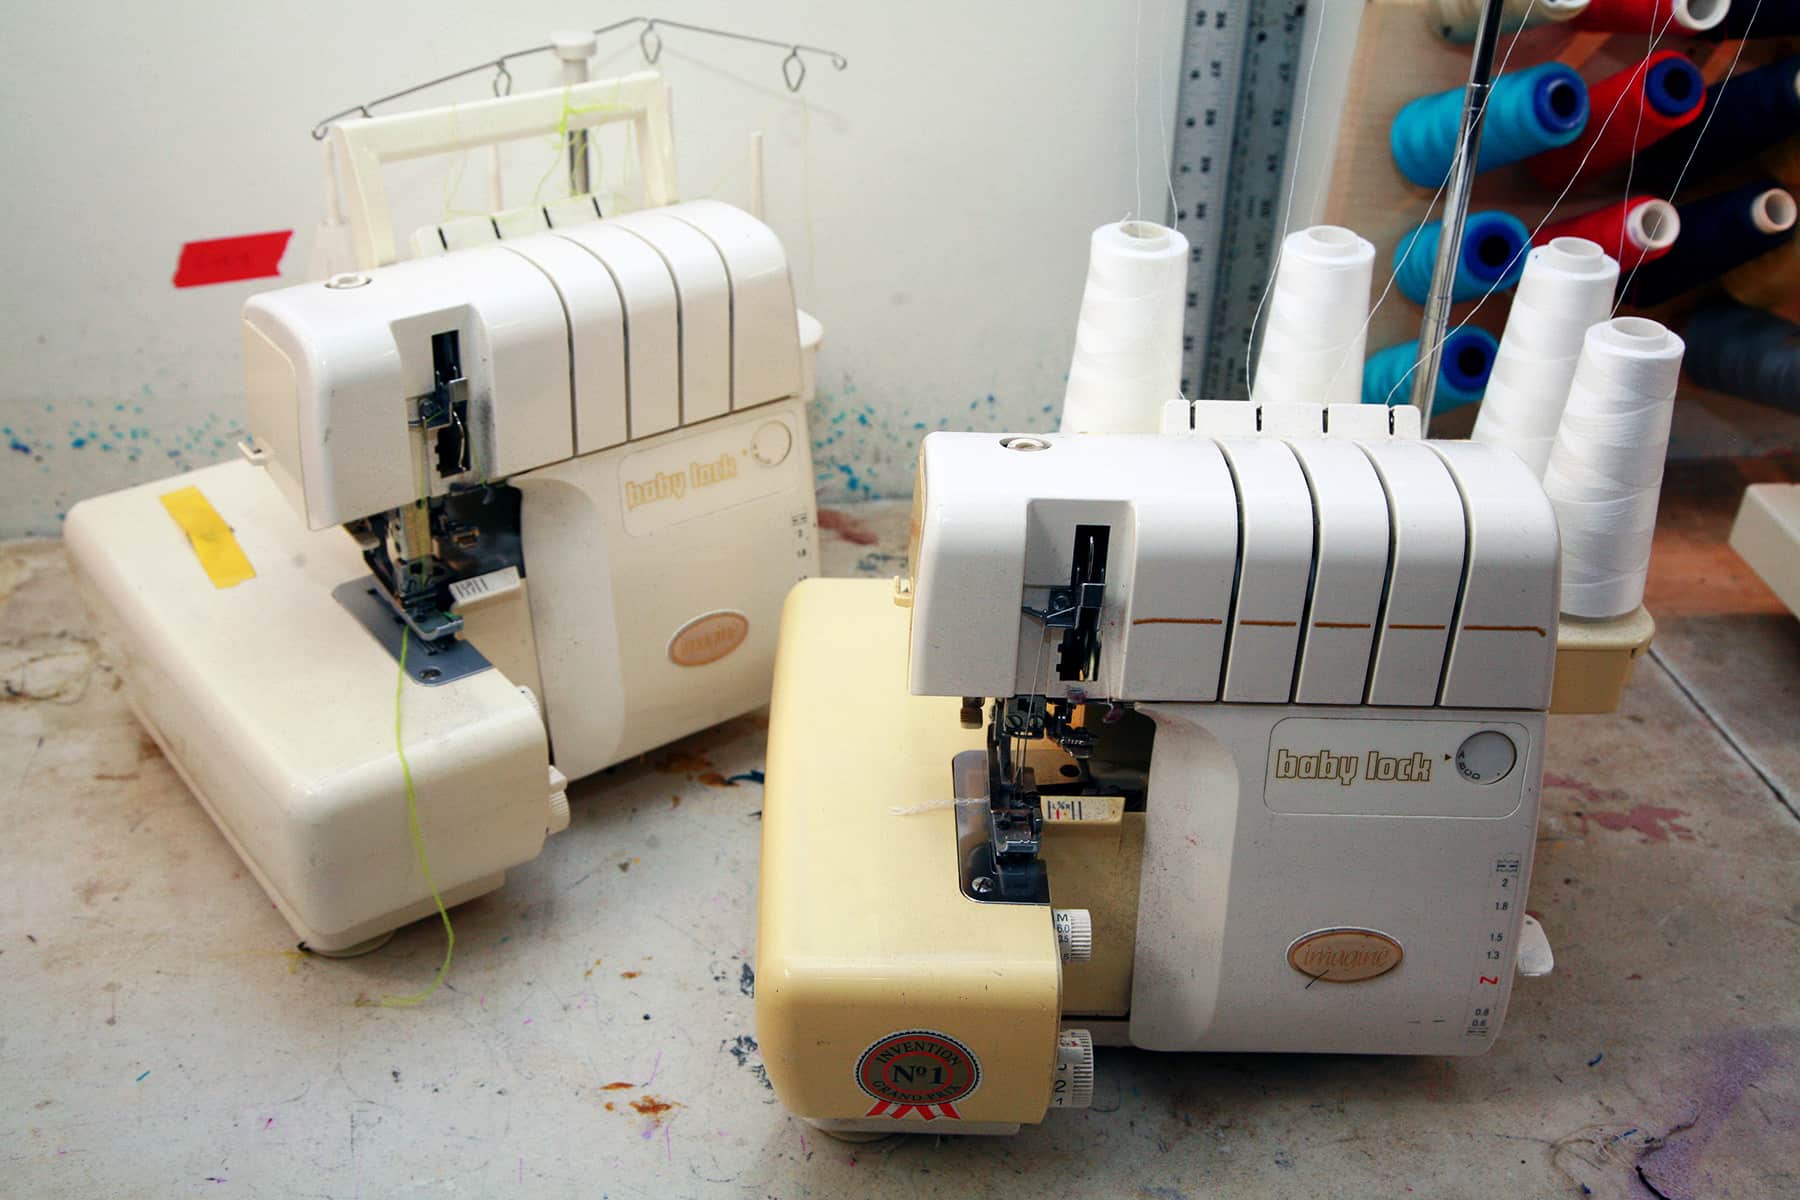 Two Babylock Imagine sergers are pictured on a work table.